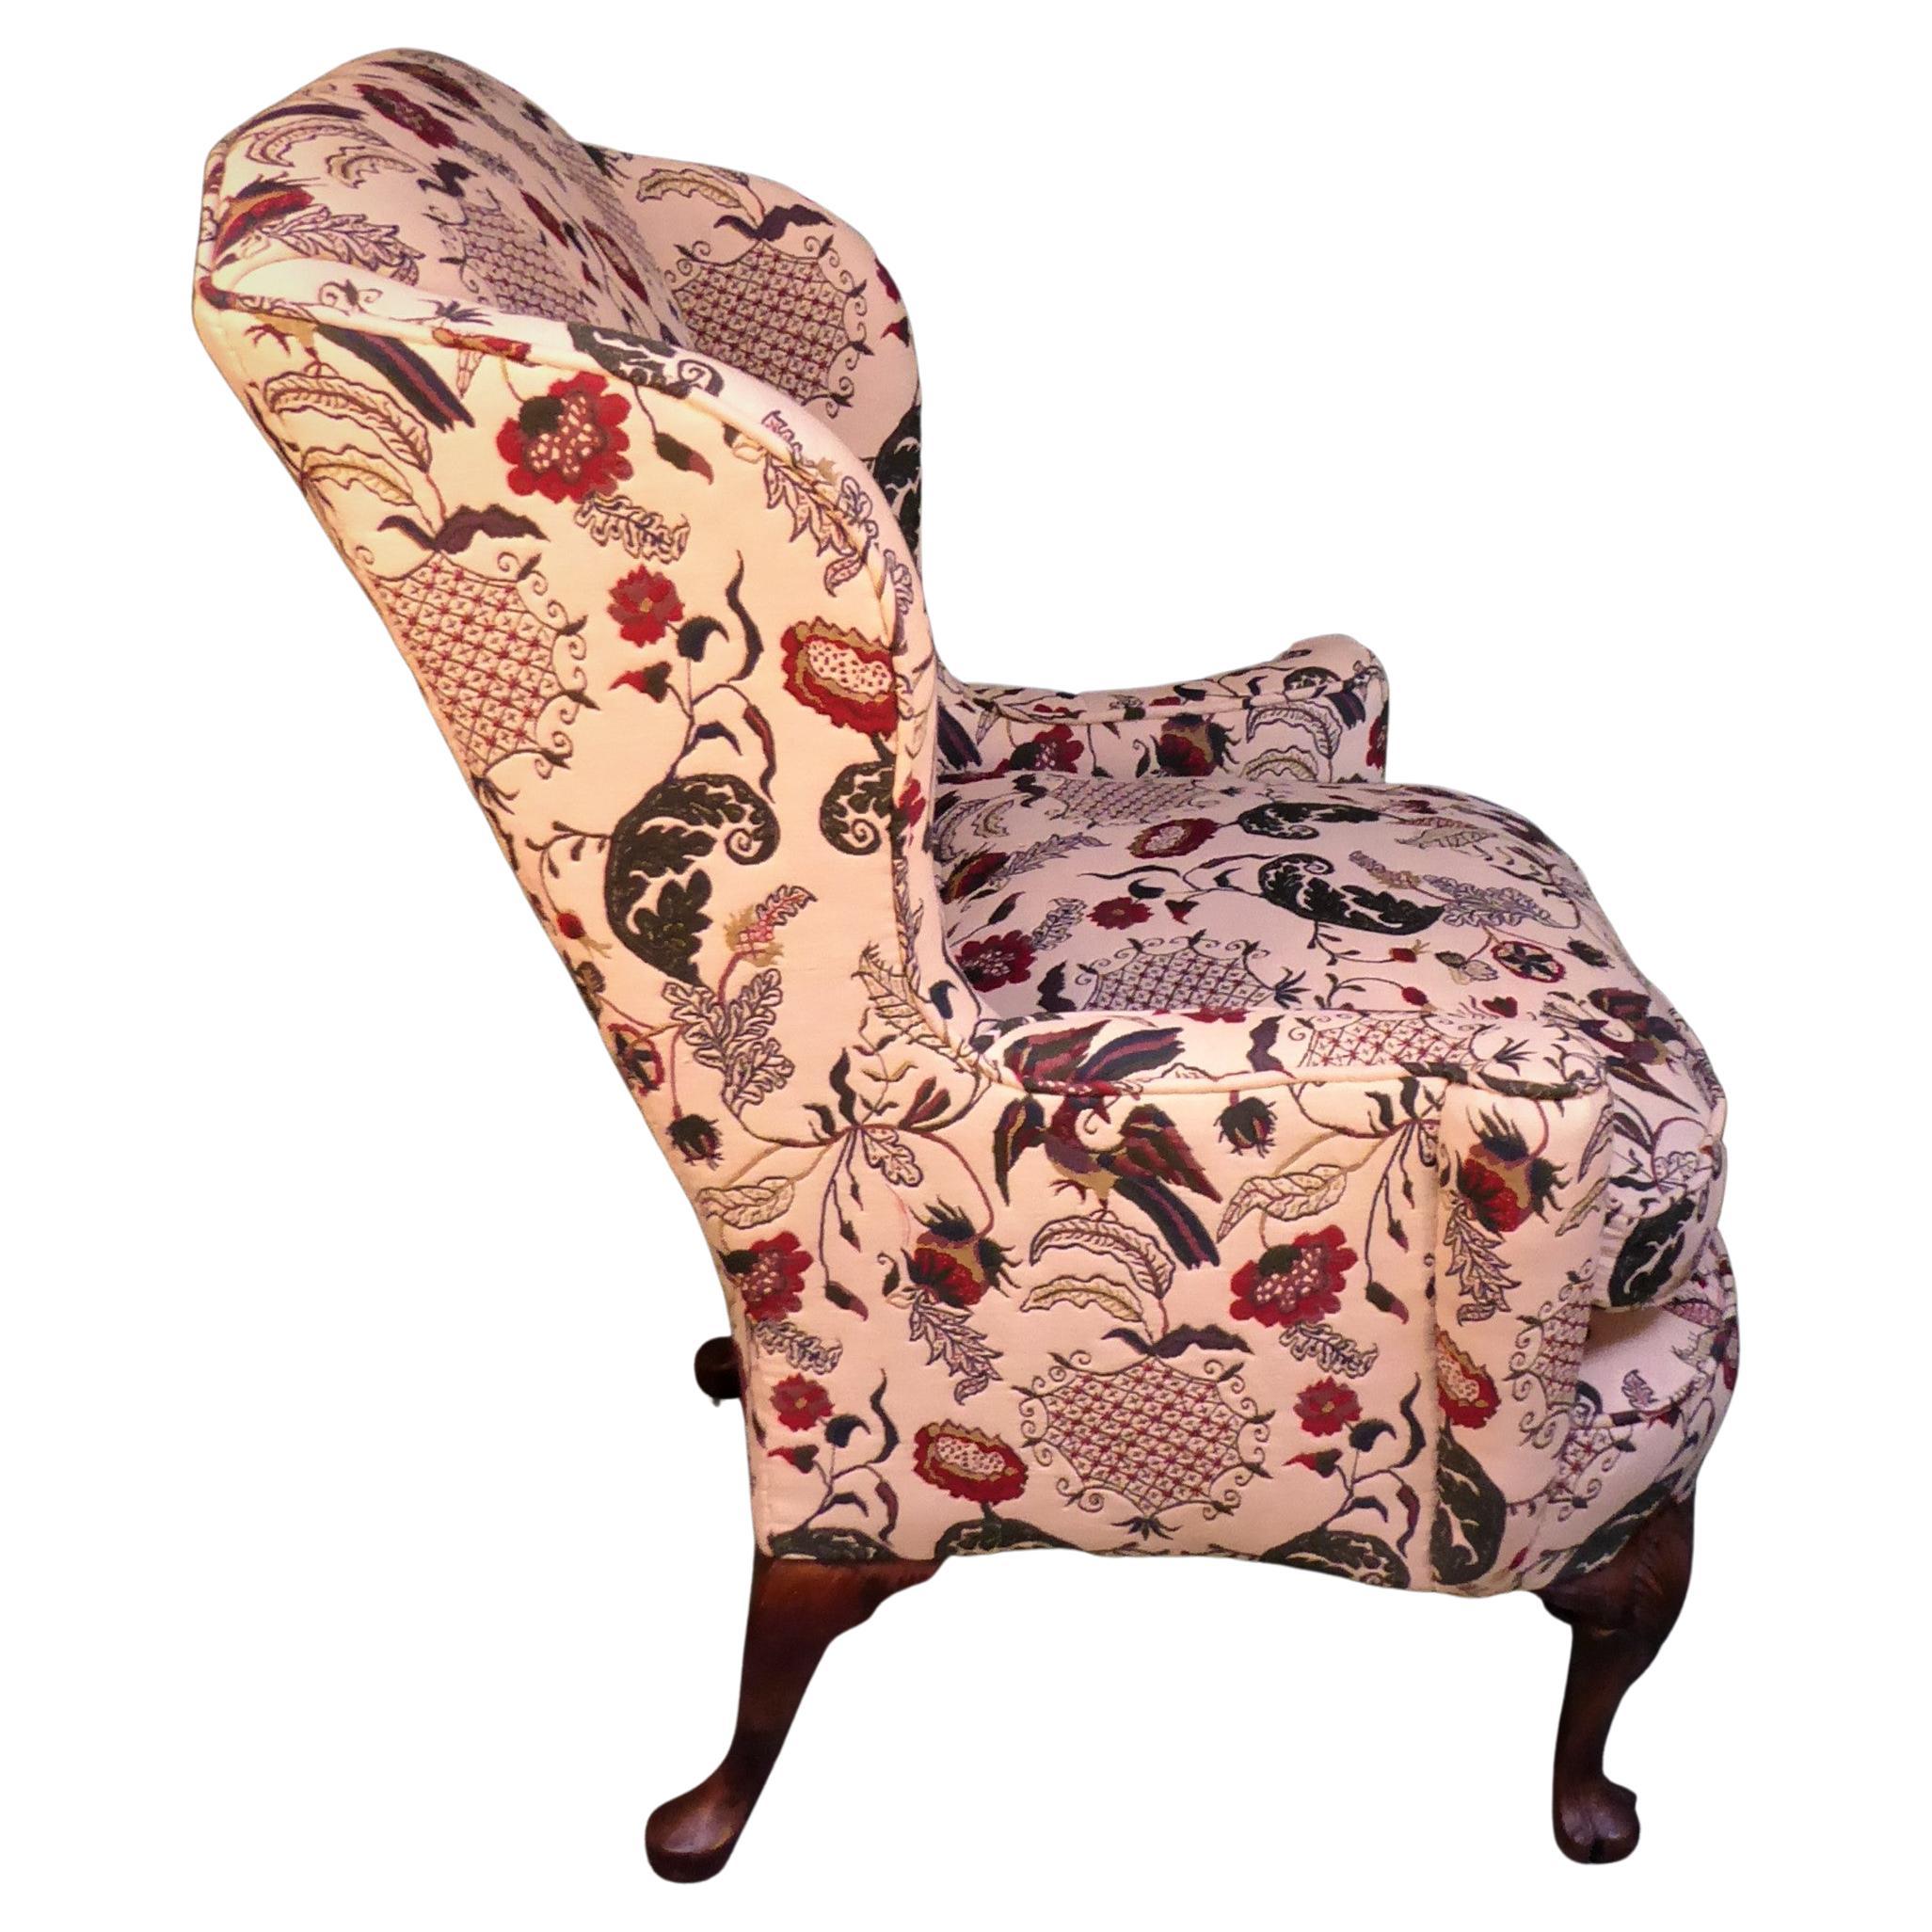 English Wing Chair